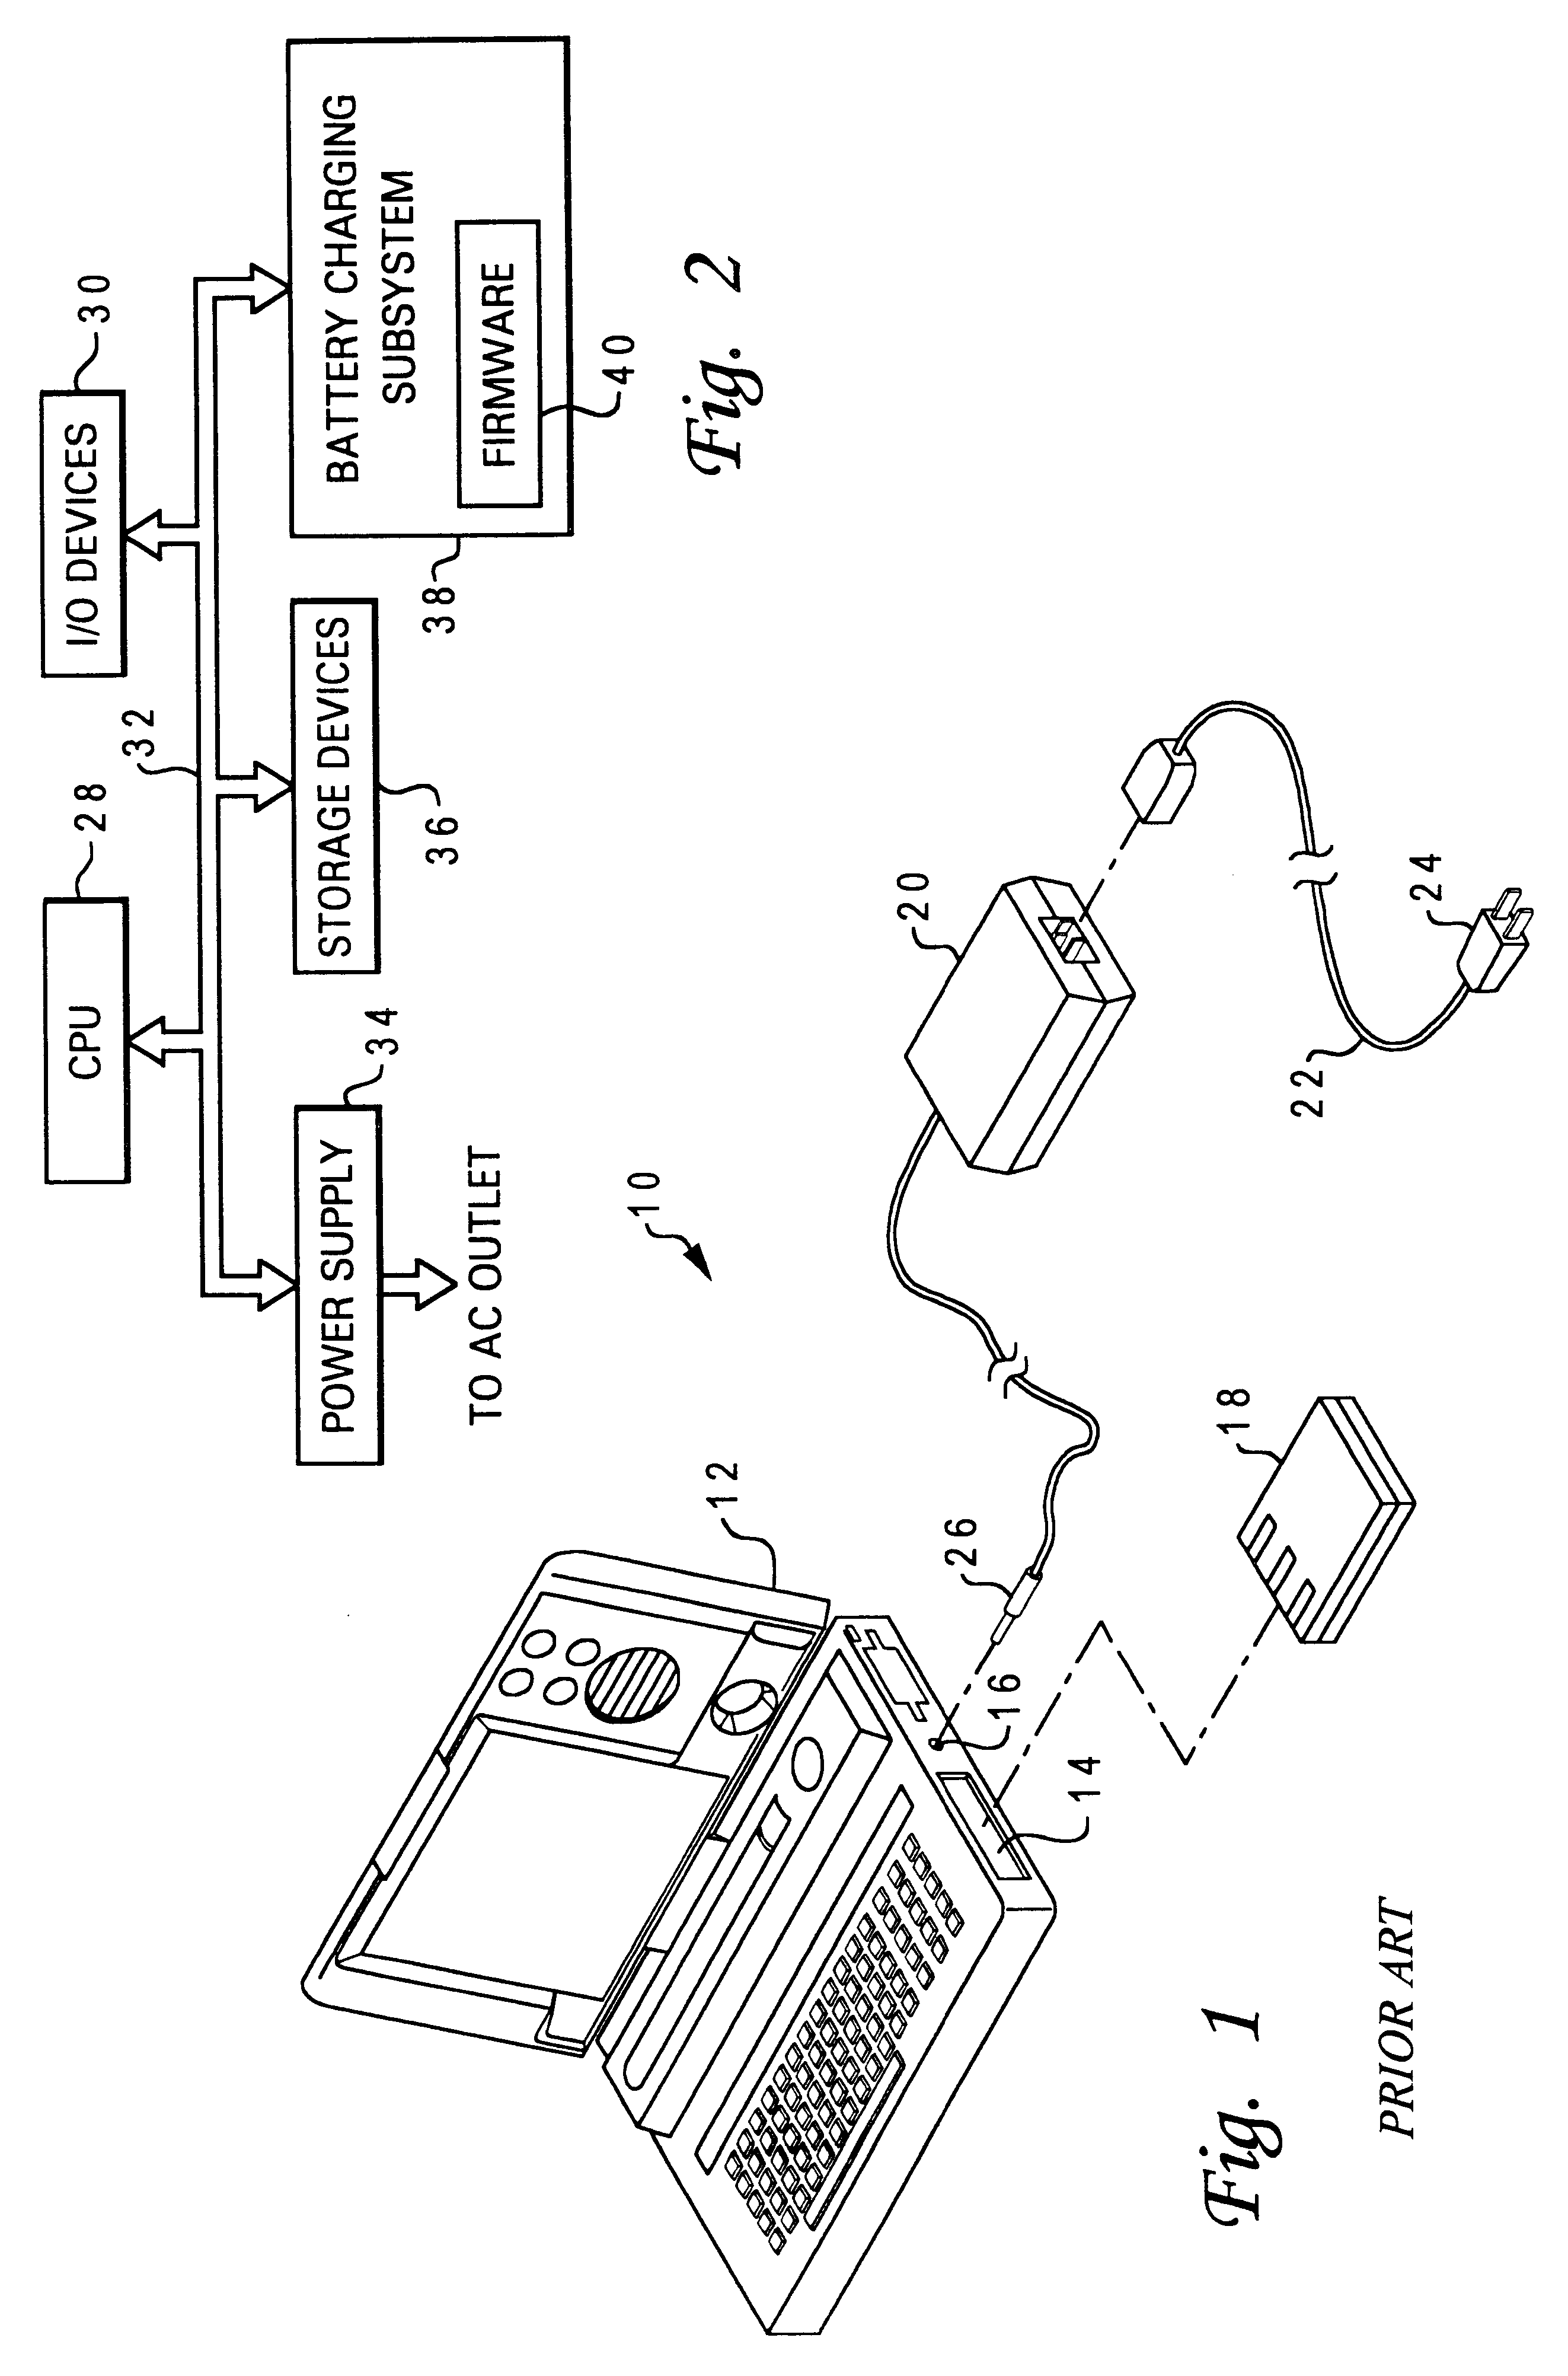 Method and system for remotely supplying power through an automated power adapter to a data processing system